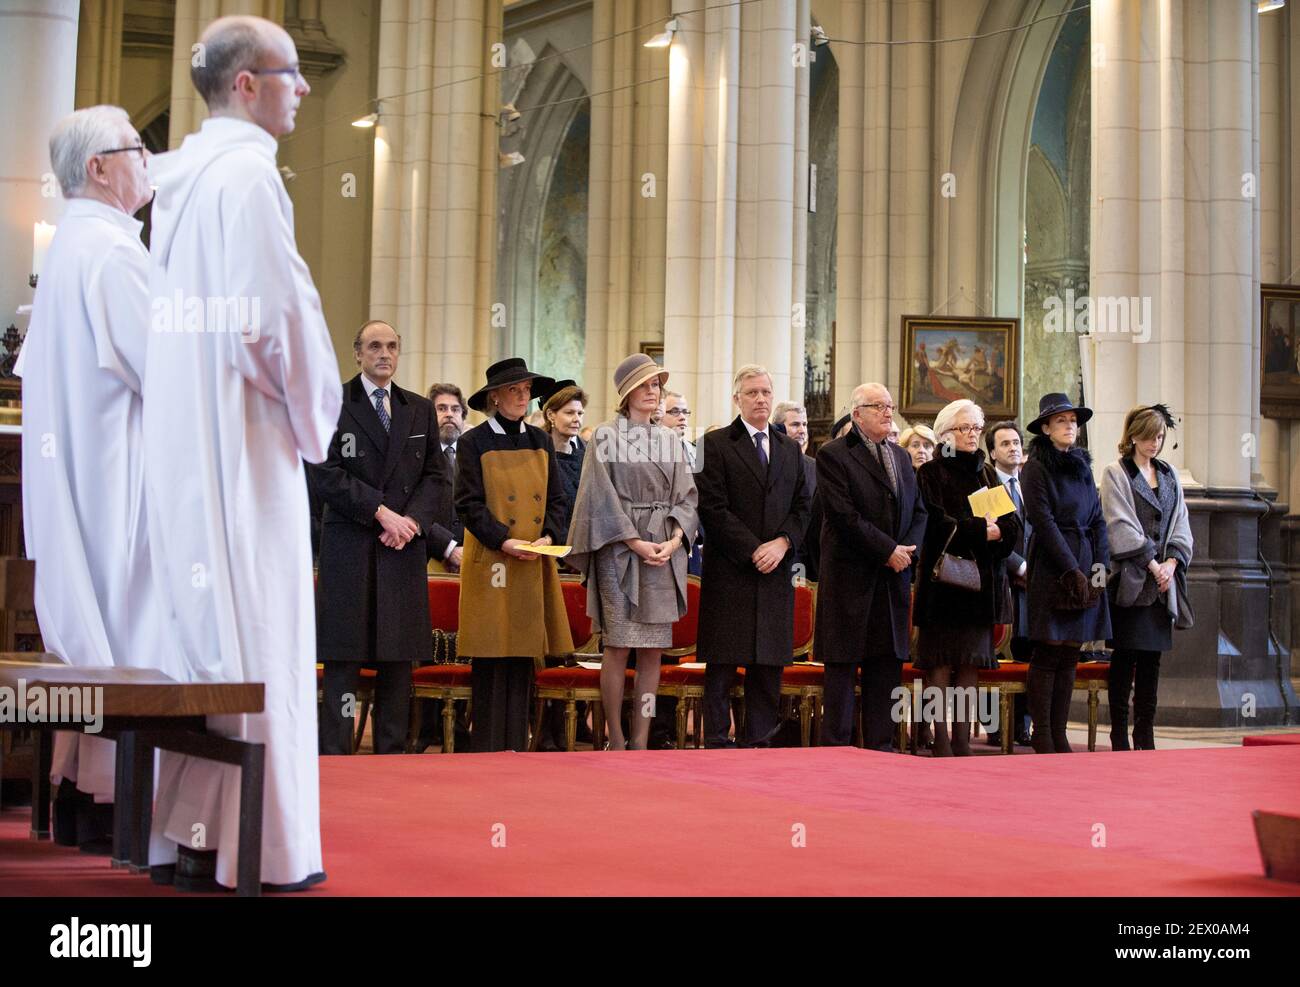 King Filip and Queen Mathilde and the Members of the Royal Family King Albert II, Queen Paola Princess Astrid Prince Lorenz, Prince Laurent, Princess Claire attend the annual celebration of the Eucharist in memory of the deceased members the Royal Family. The Mass will take place at the Our Lady Church in Laken. Feb. 12, 2015 *** Please Use Credit from Credit Field *** Stock Photo